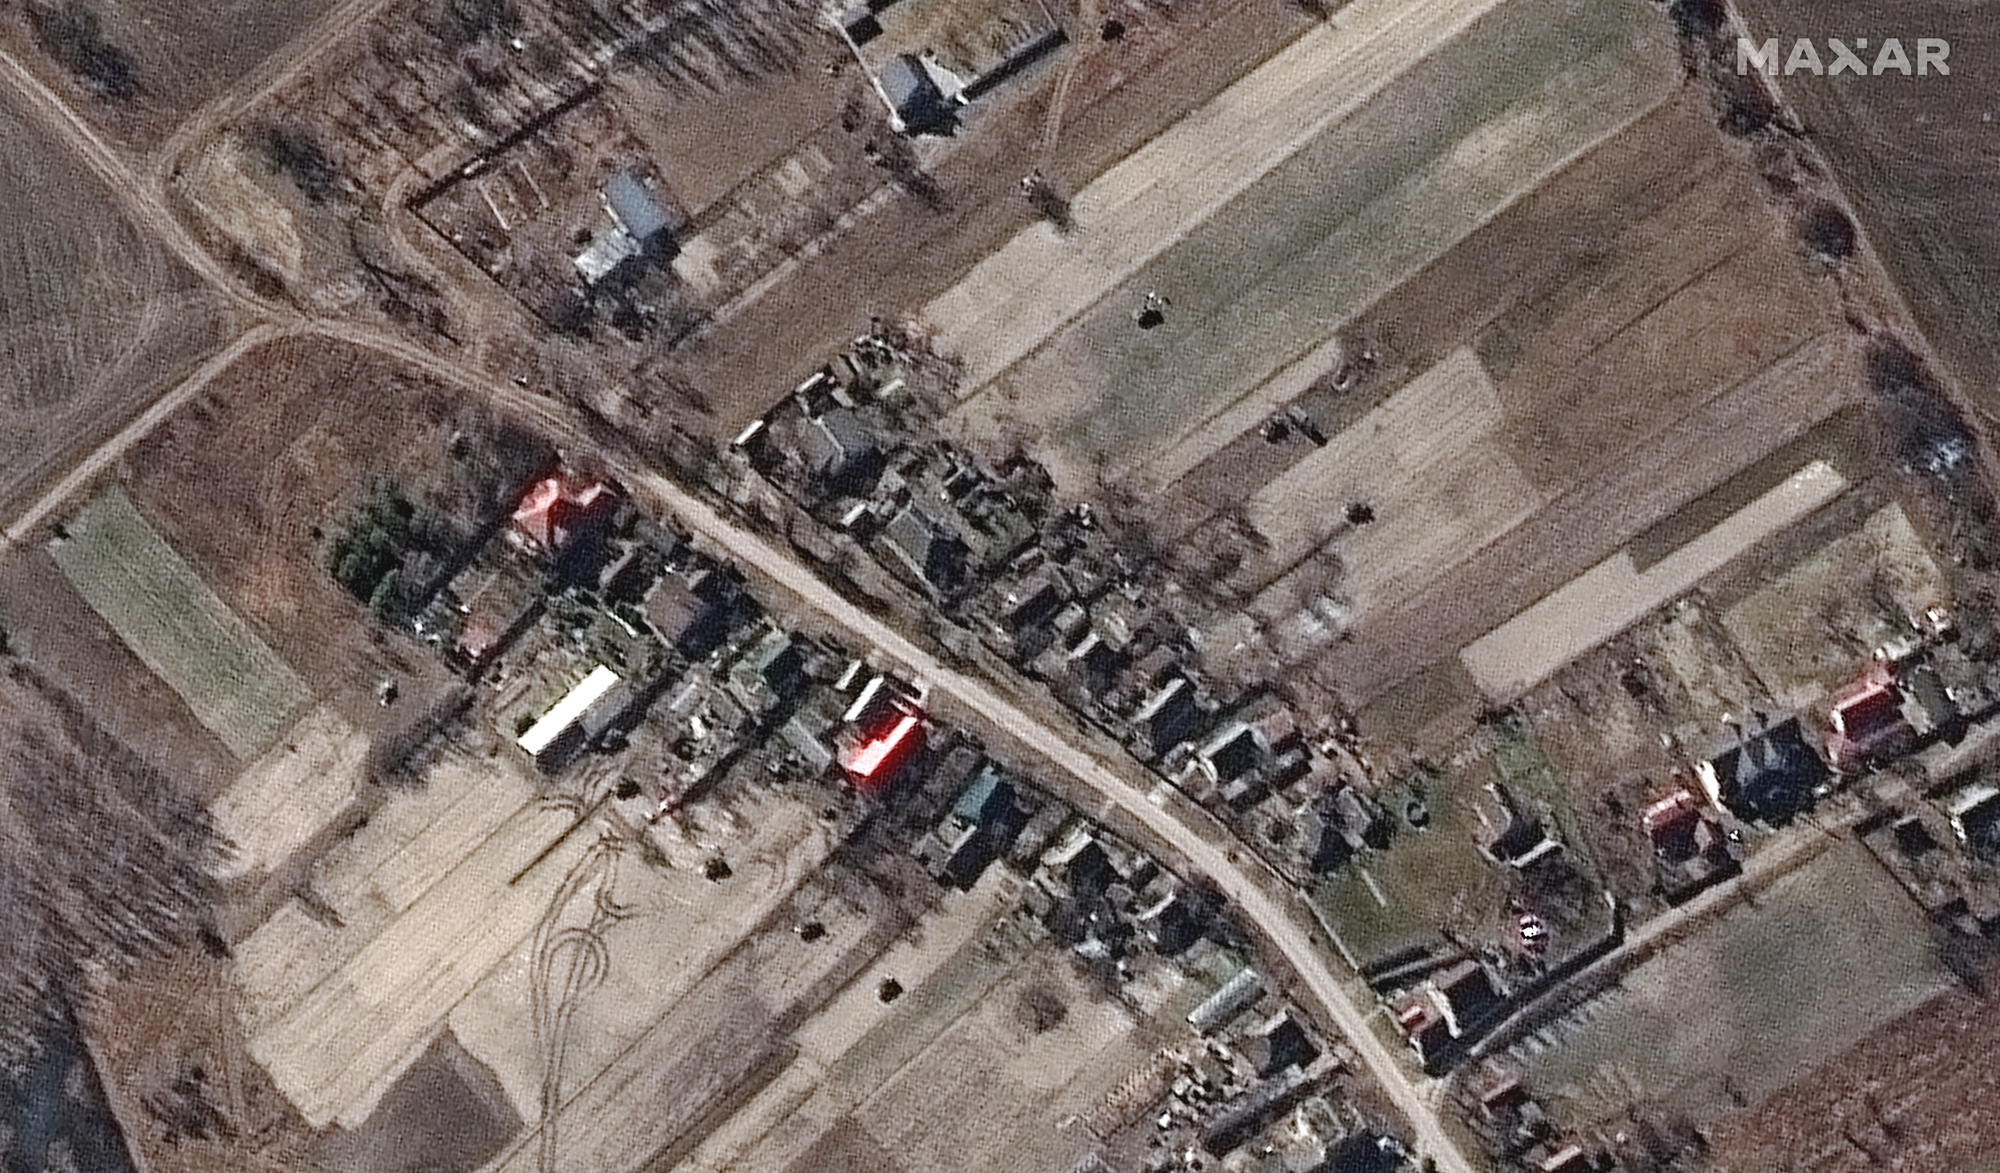 The military deployment of armored vehicles in residential area of Ozera, Ukraine on March 11, 2022 as seen by the WorldView-2 satellite for Maxar Technologies.